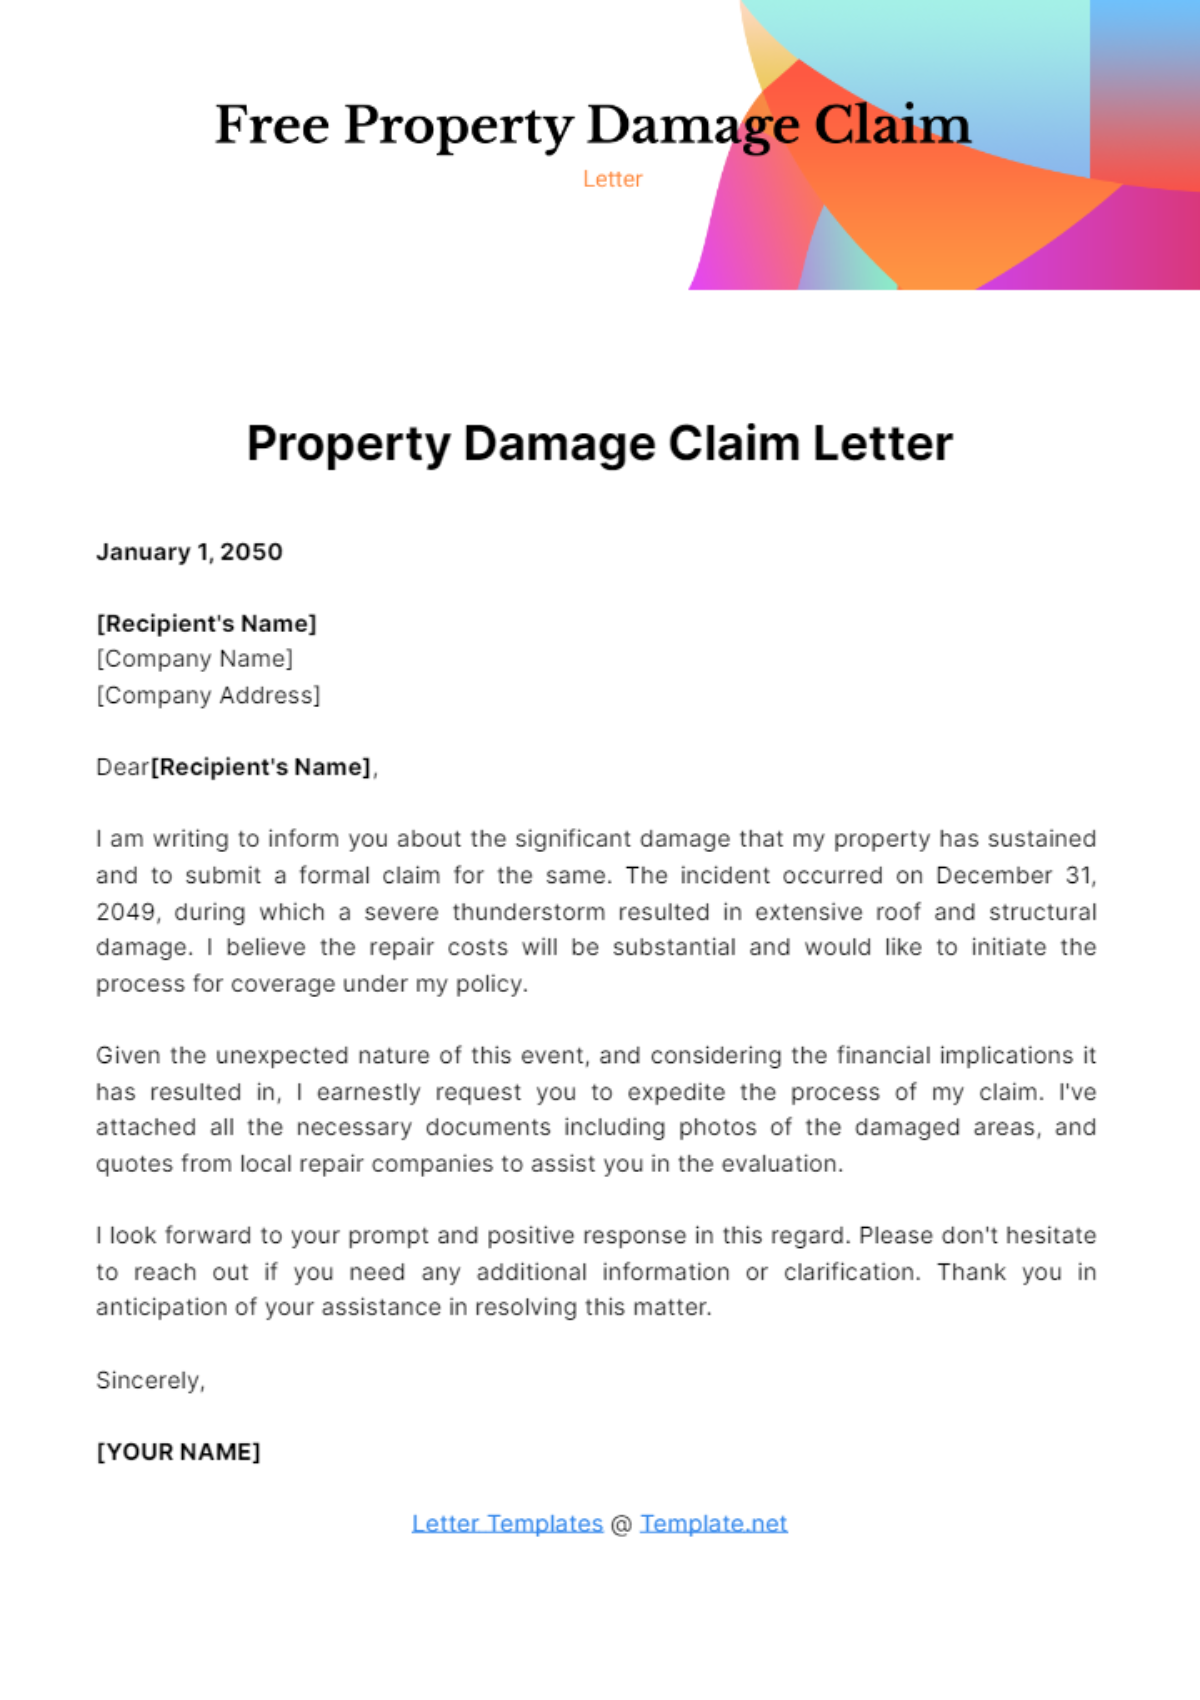 Free Property Damage Claim Letter Template